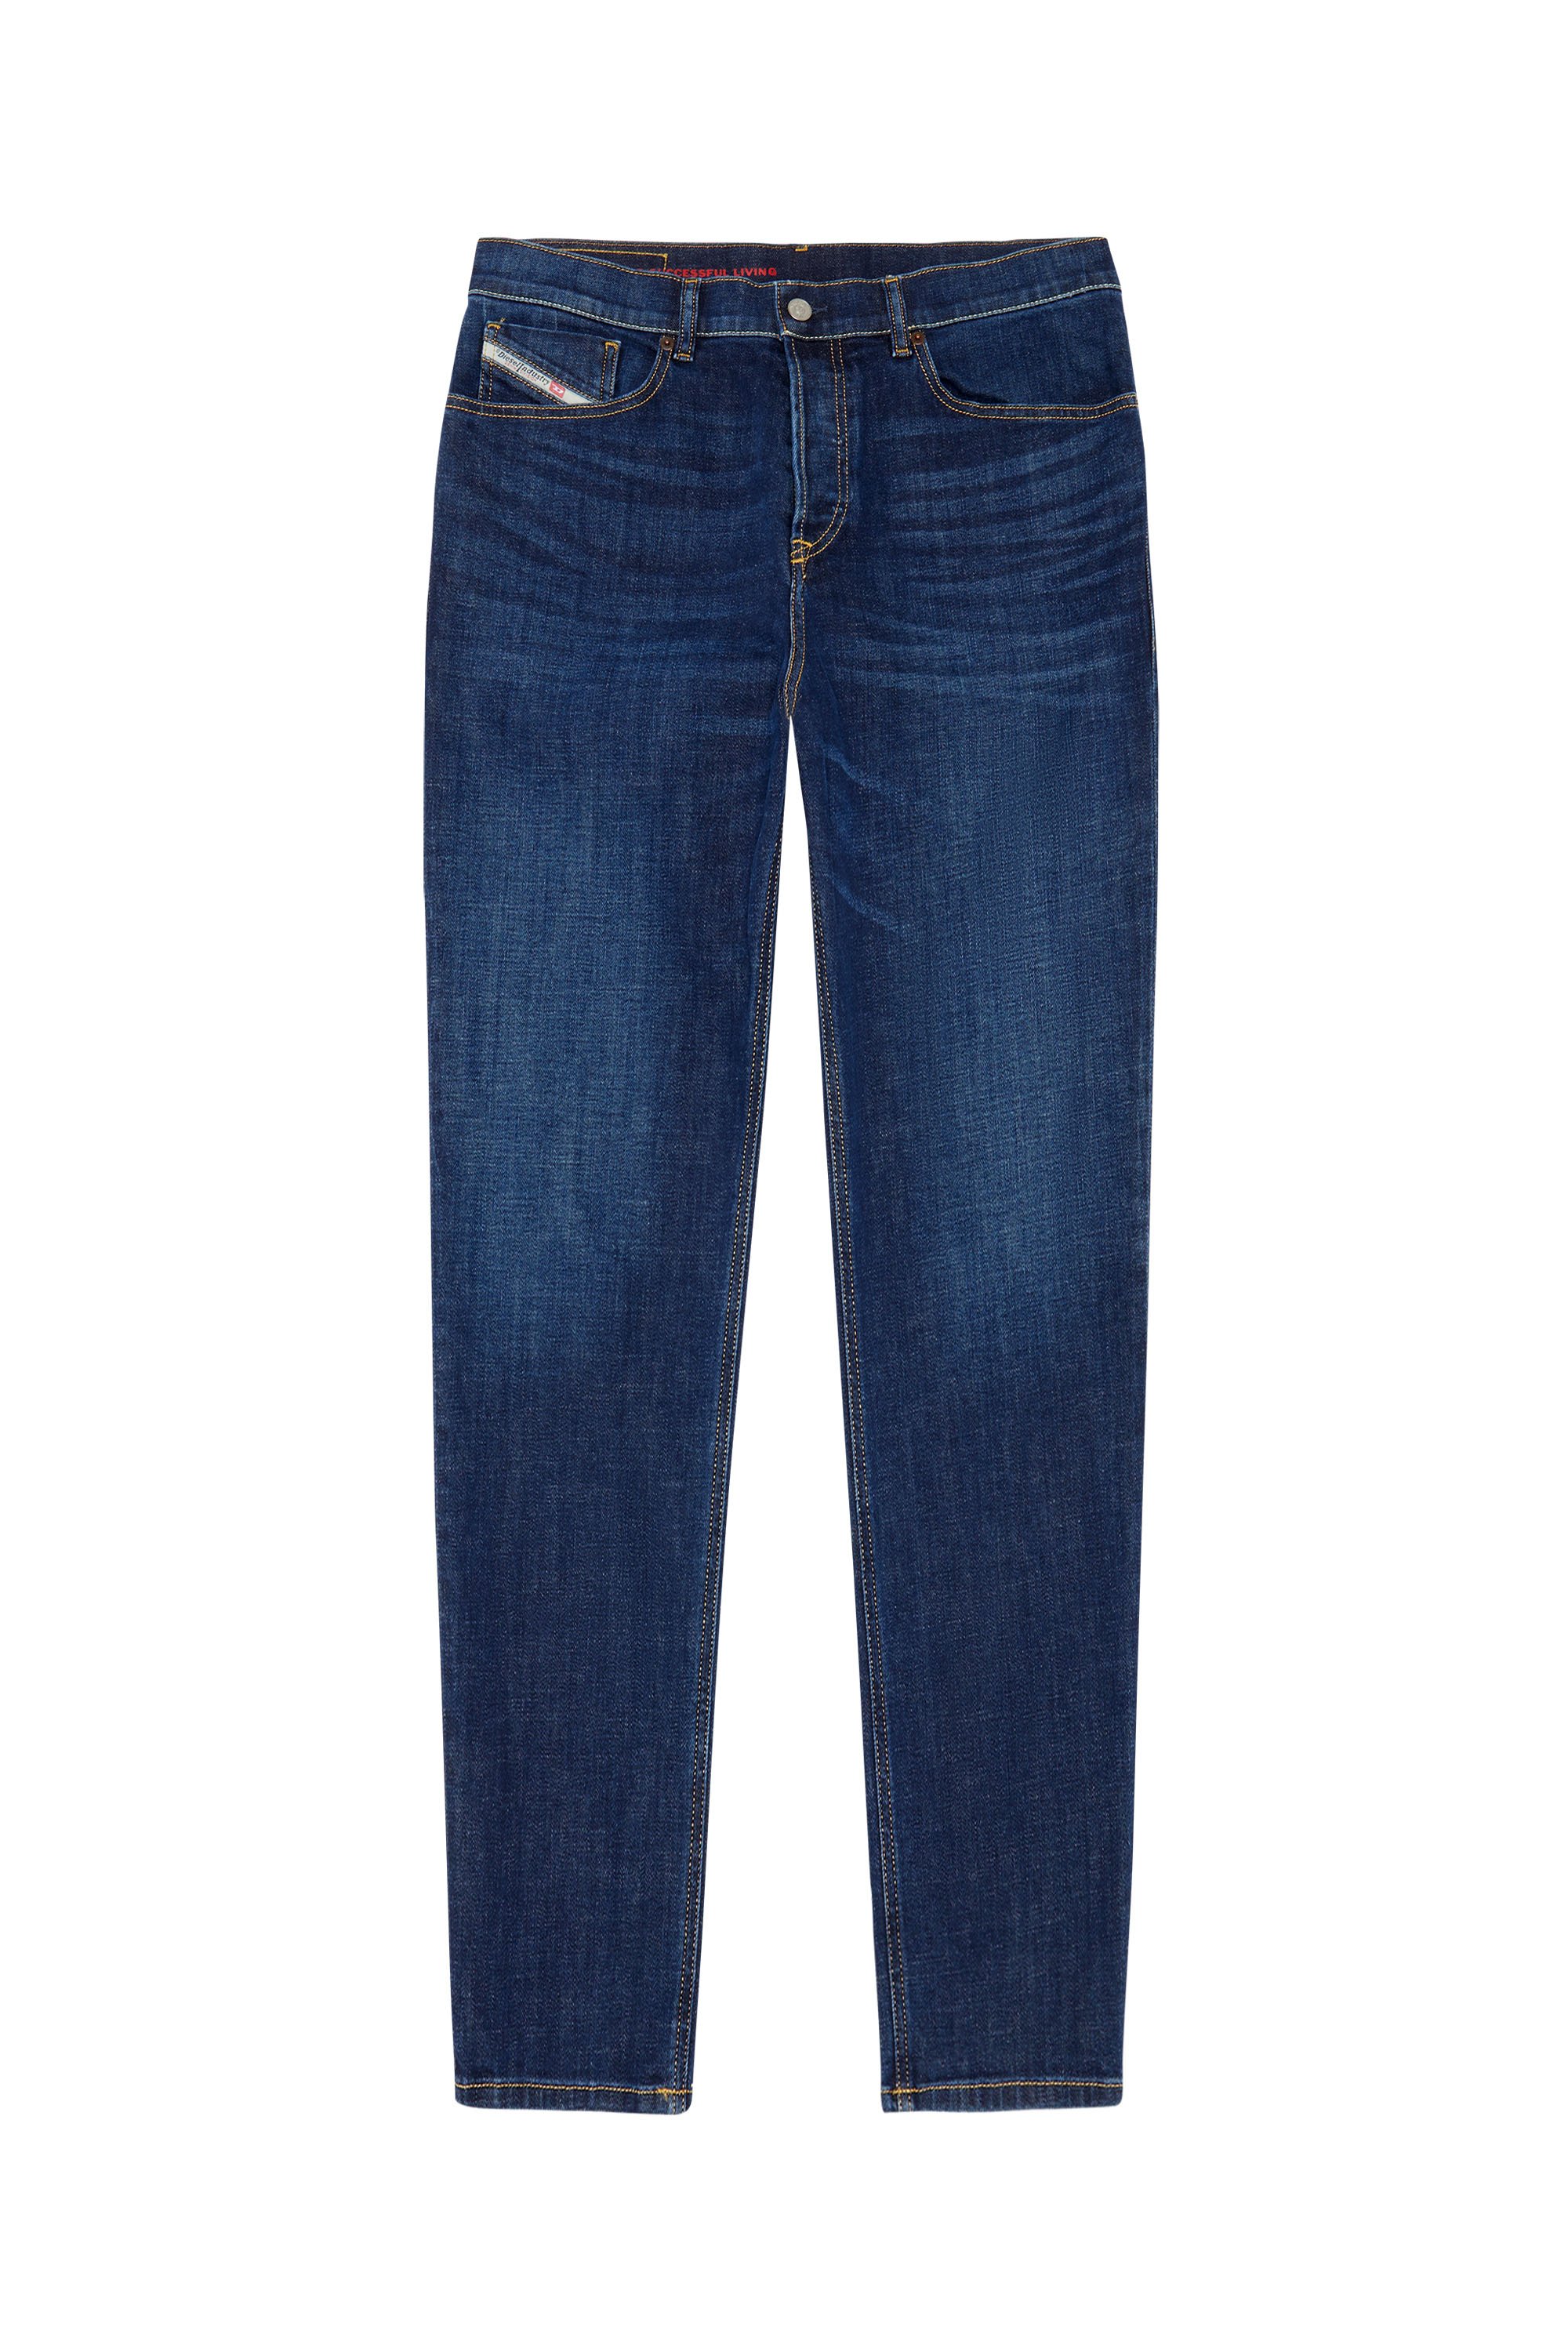 Tapered Jeans 2005 D-Fining 09B90, Dunkelblau - Jeans